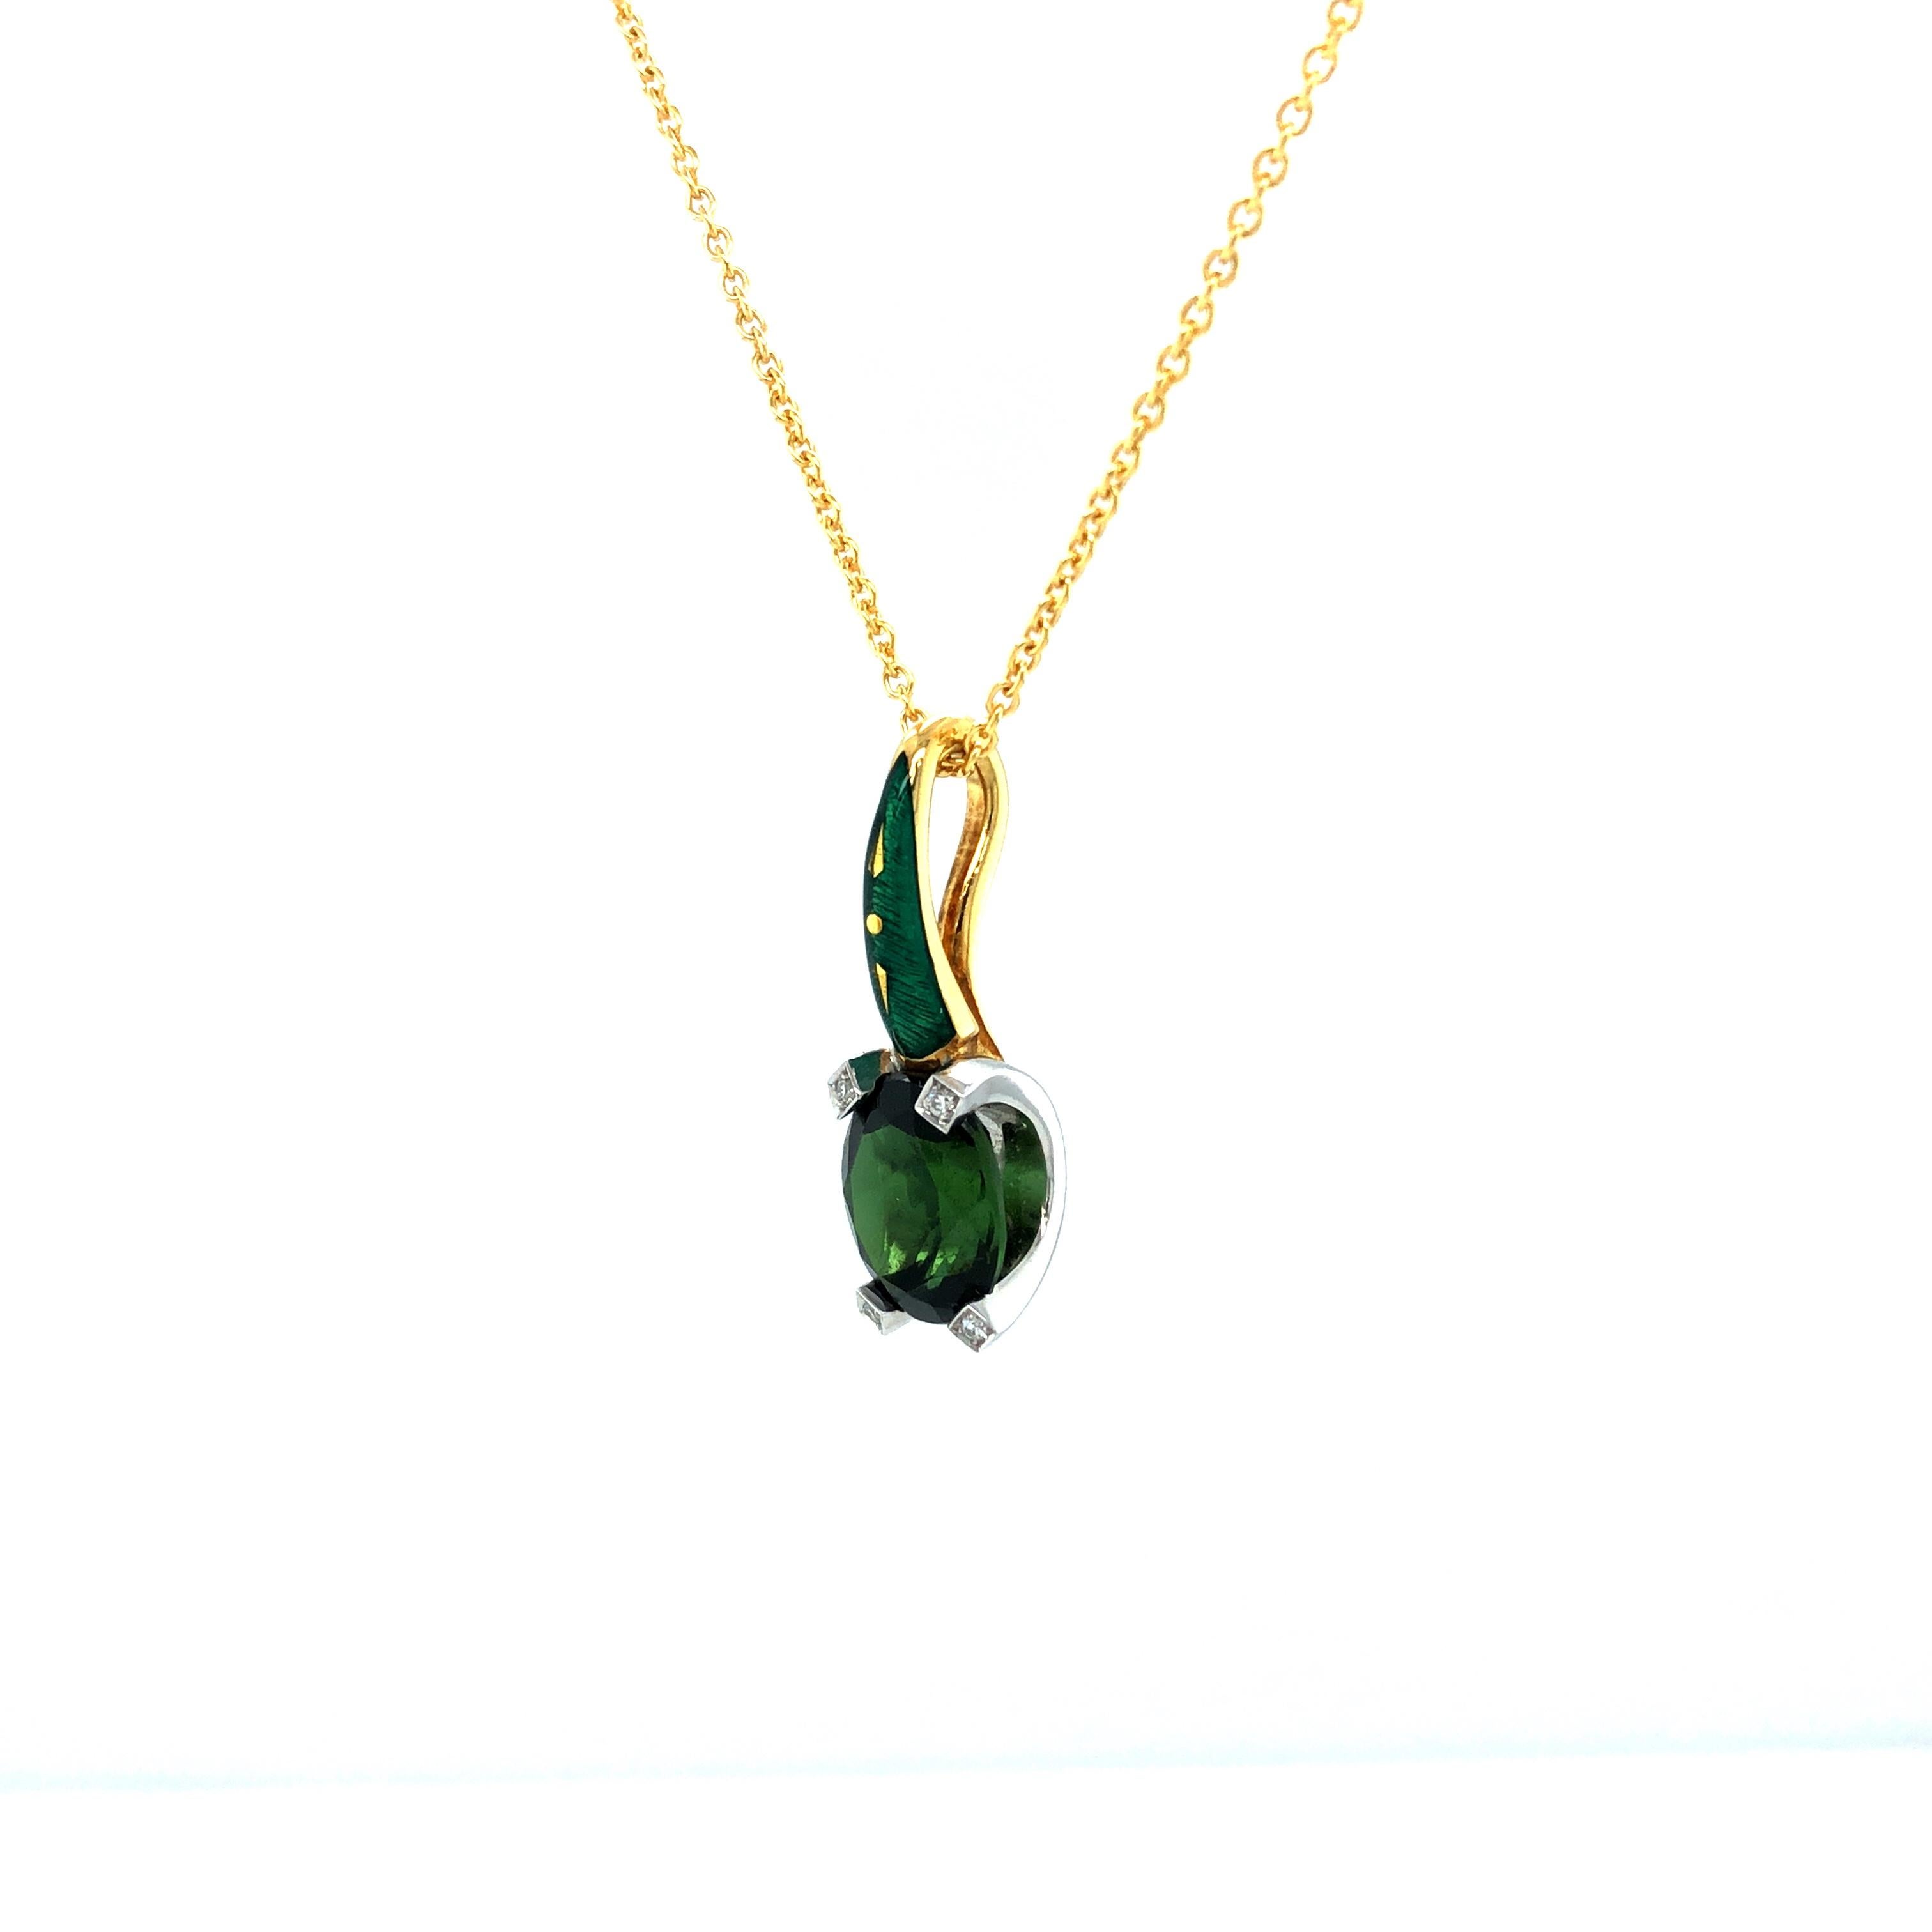 Victor Mayer pendant necklace, Cocktail collection, 18k yellow gold white gold, emerald green vitreous enamel with three paillons, 5 diamonds, total 0.03 ct, G VS, green Tourmaline

About the creator Victor Mayer
Victor Mayer is internationally